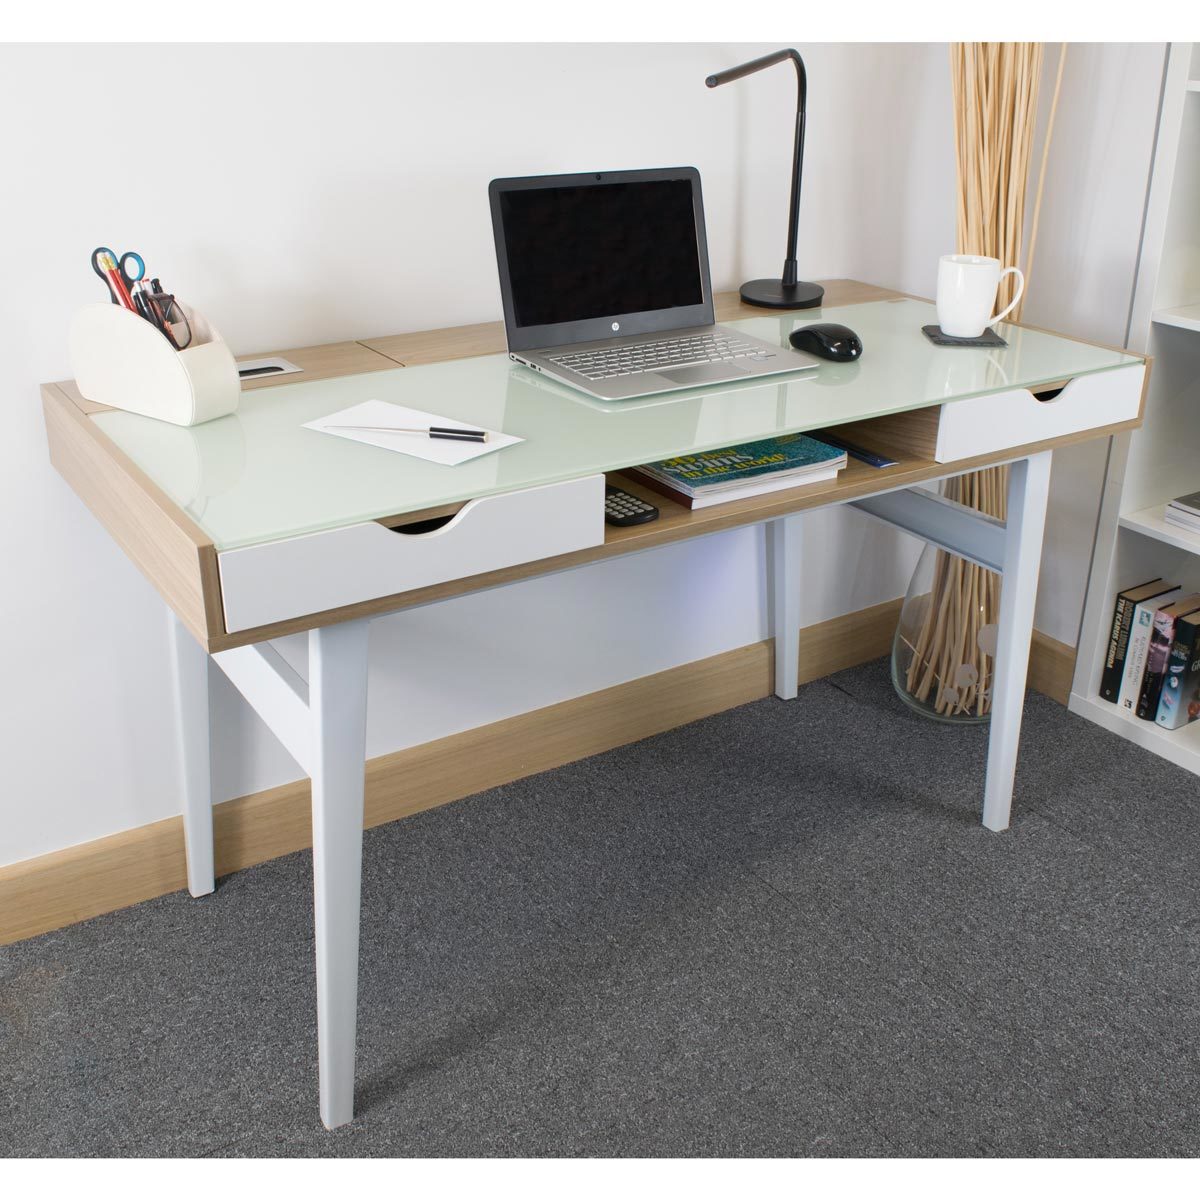 Accord Concept Ced 302 Freestanding Wood Desk With Glass Top